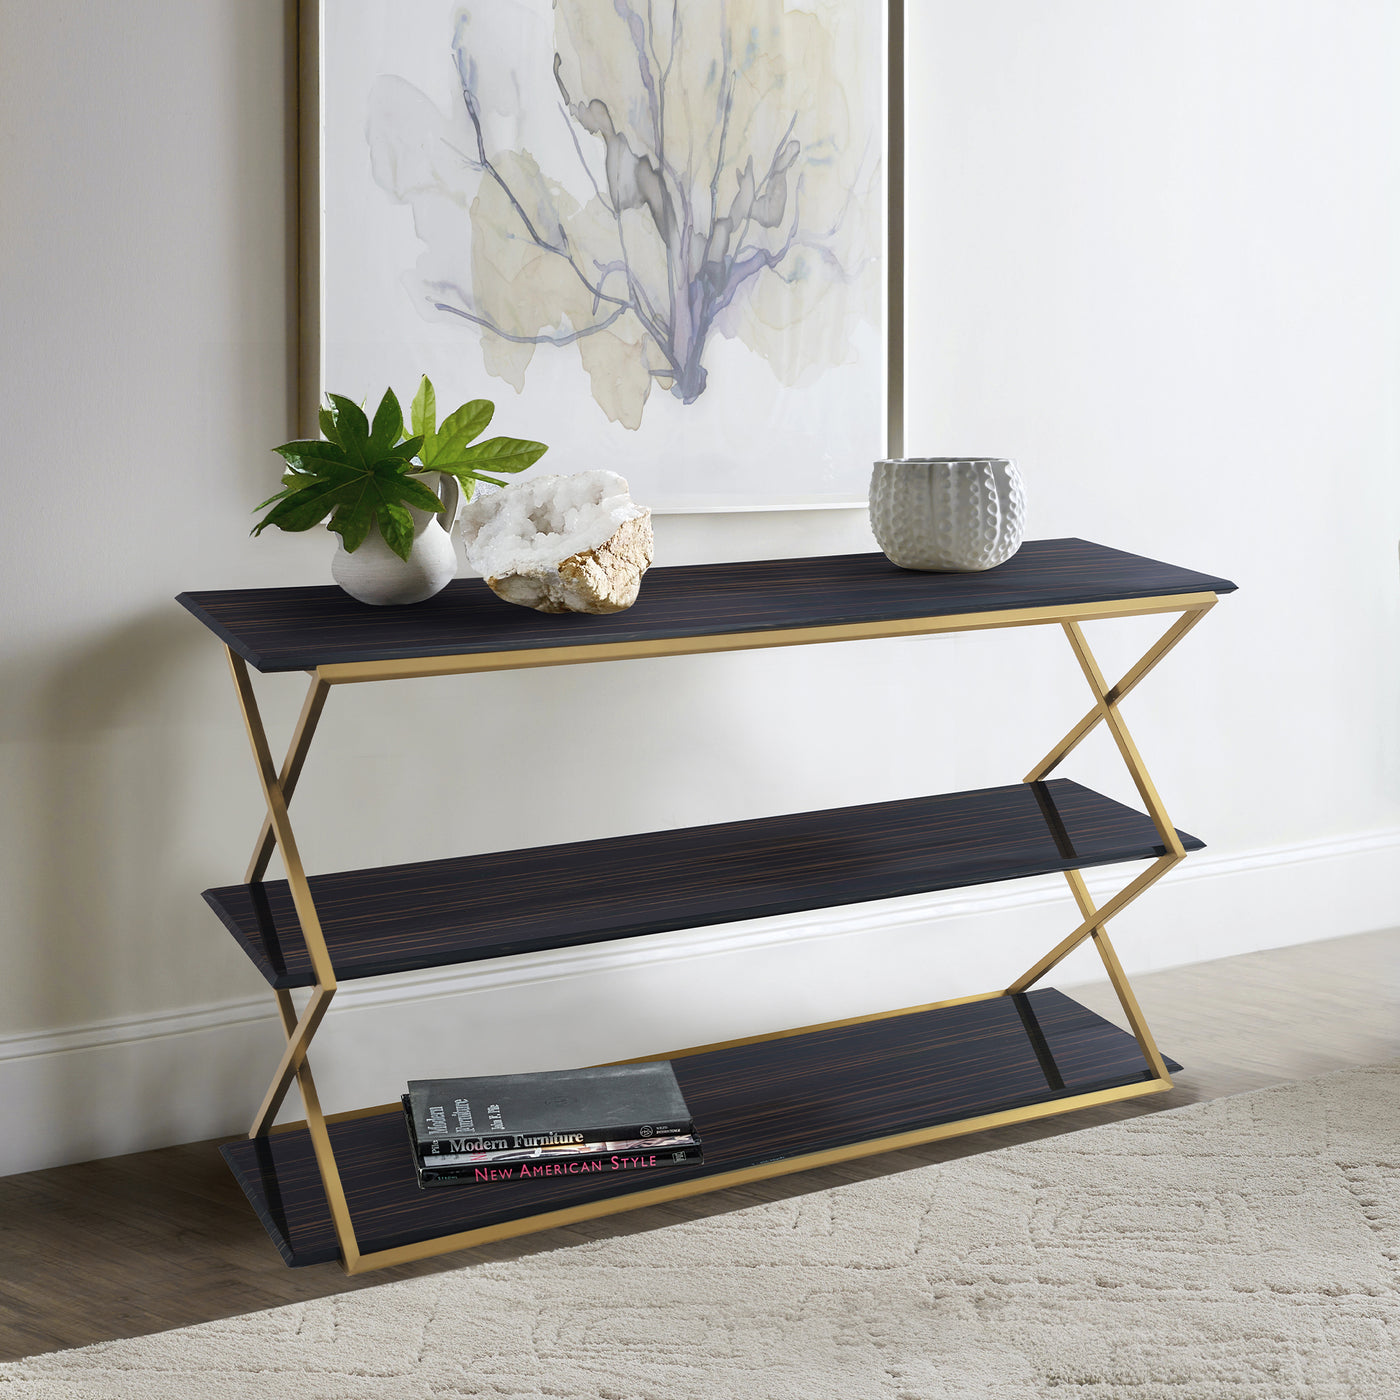 Westlake Console Table